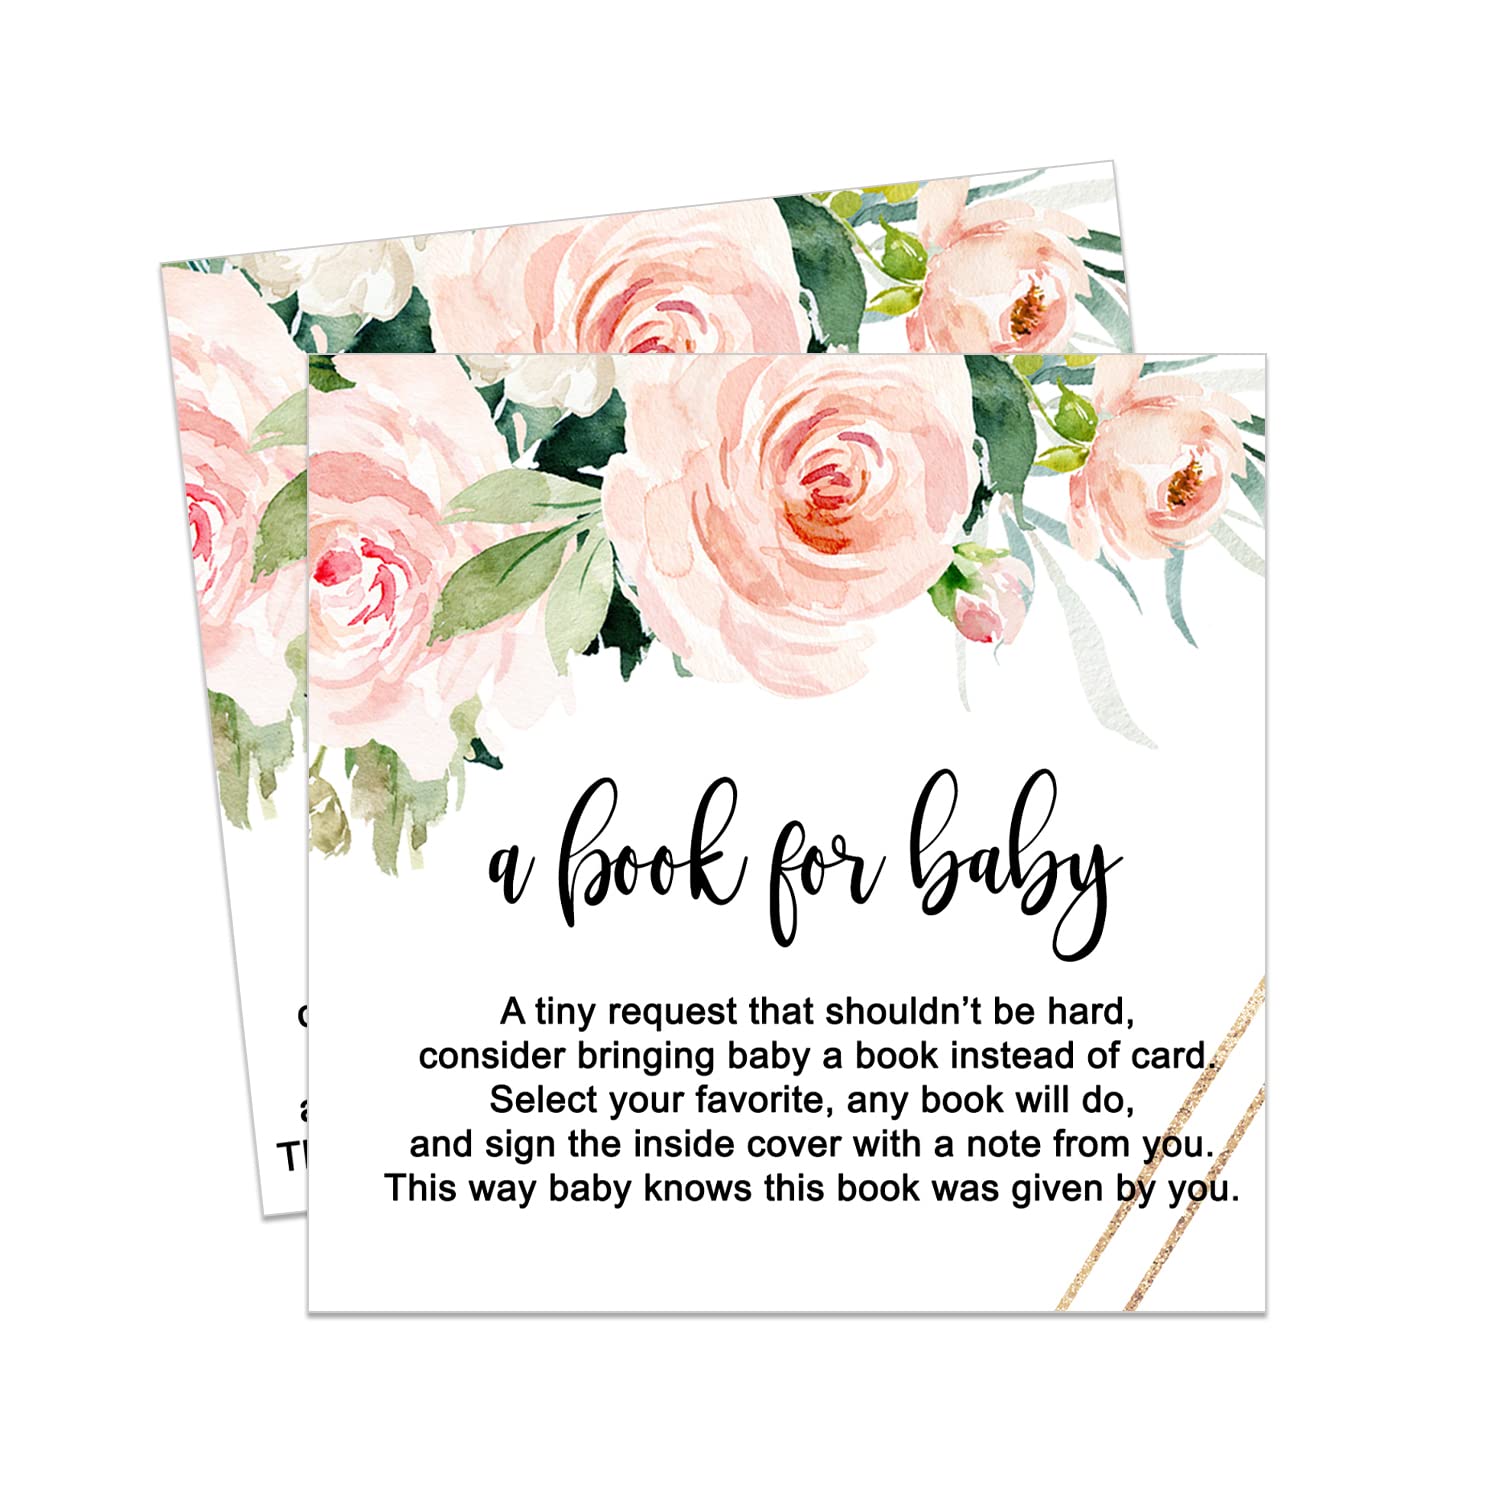 Paper Clever Party Graceful Floral Bring a Book Cards for Baby Shower (25 Pack) Bear Invitation Insert for Girls Parties – Rustic Theme Pink and Gold – 4x4 Printed Card Set